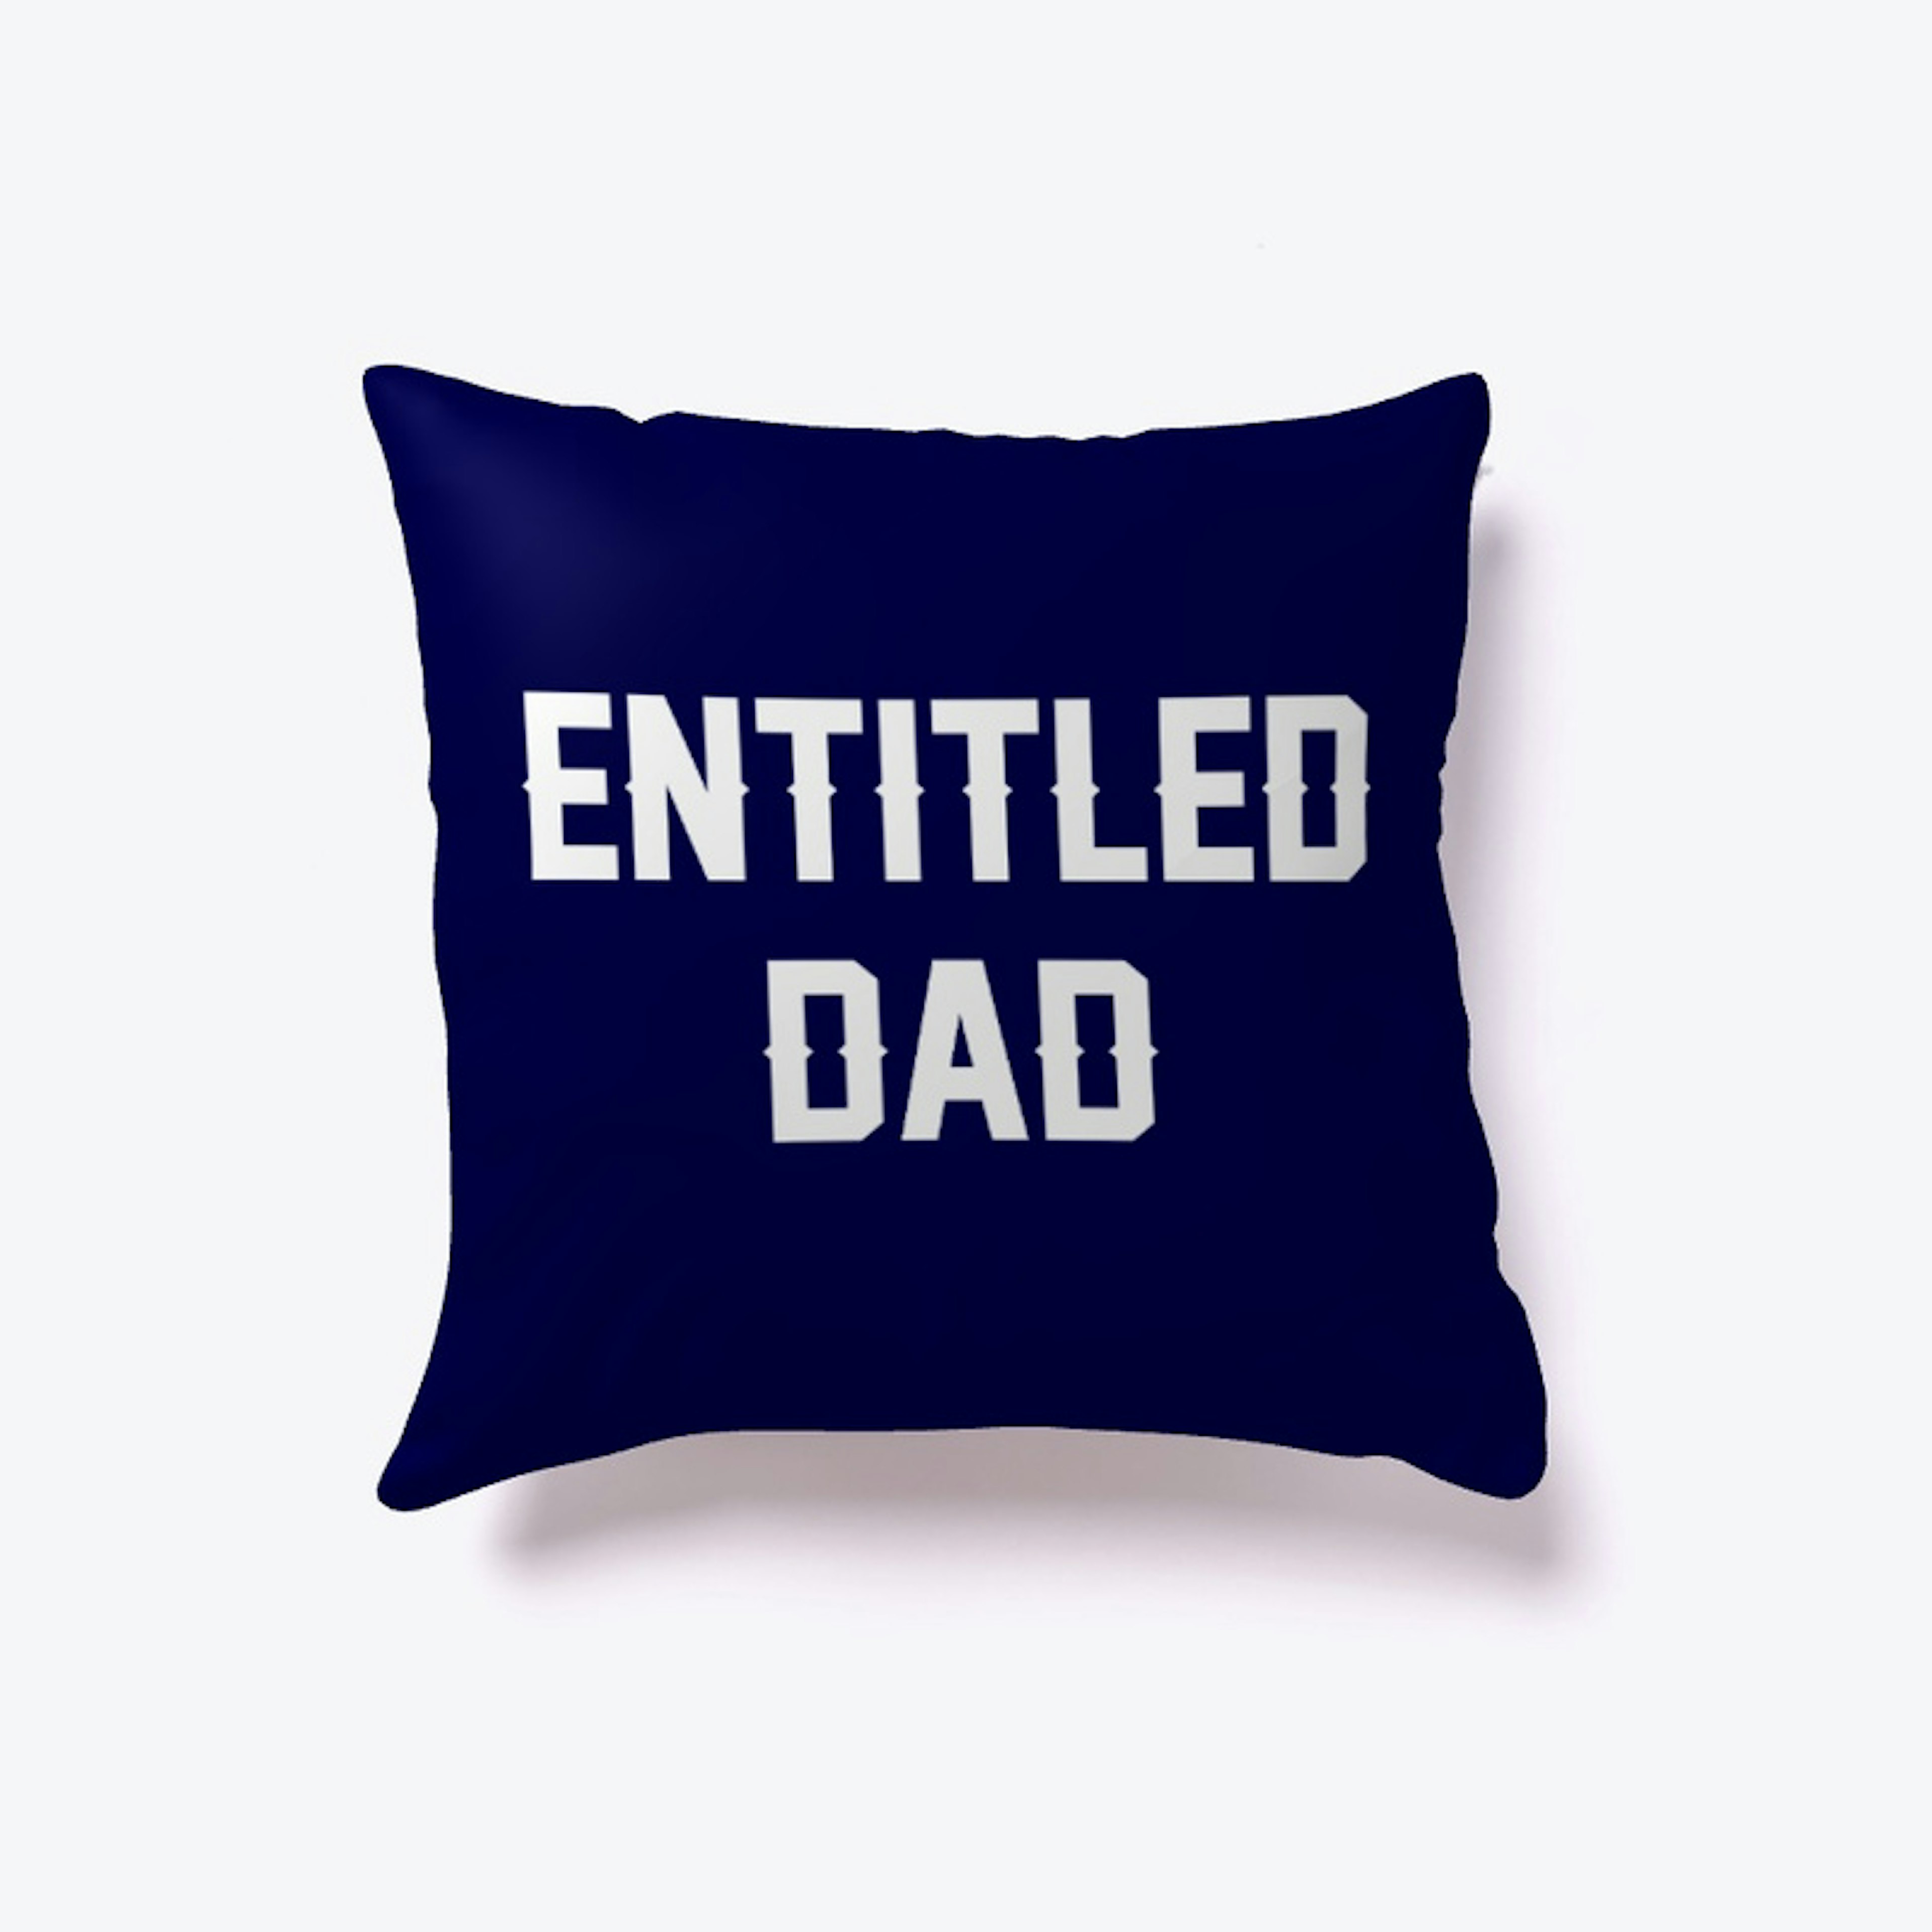 Entitled Dad Products